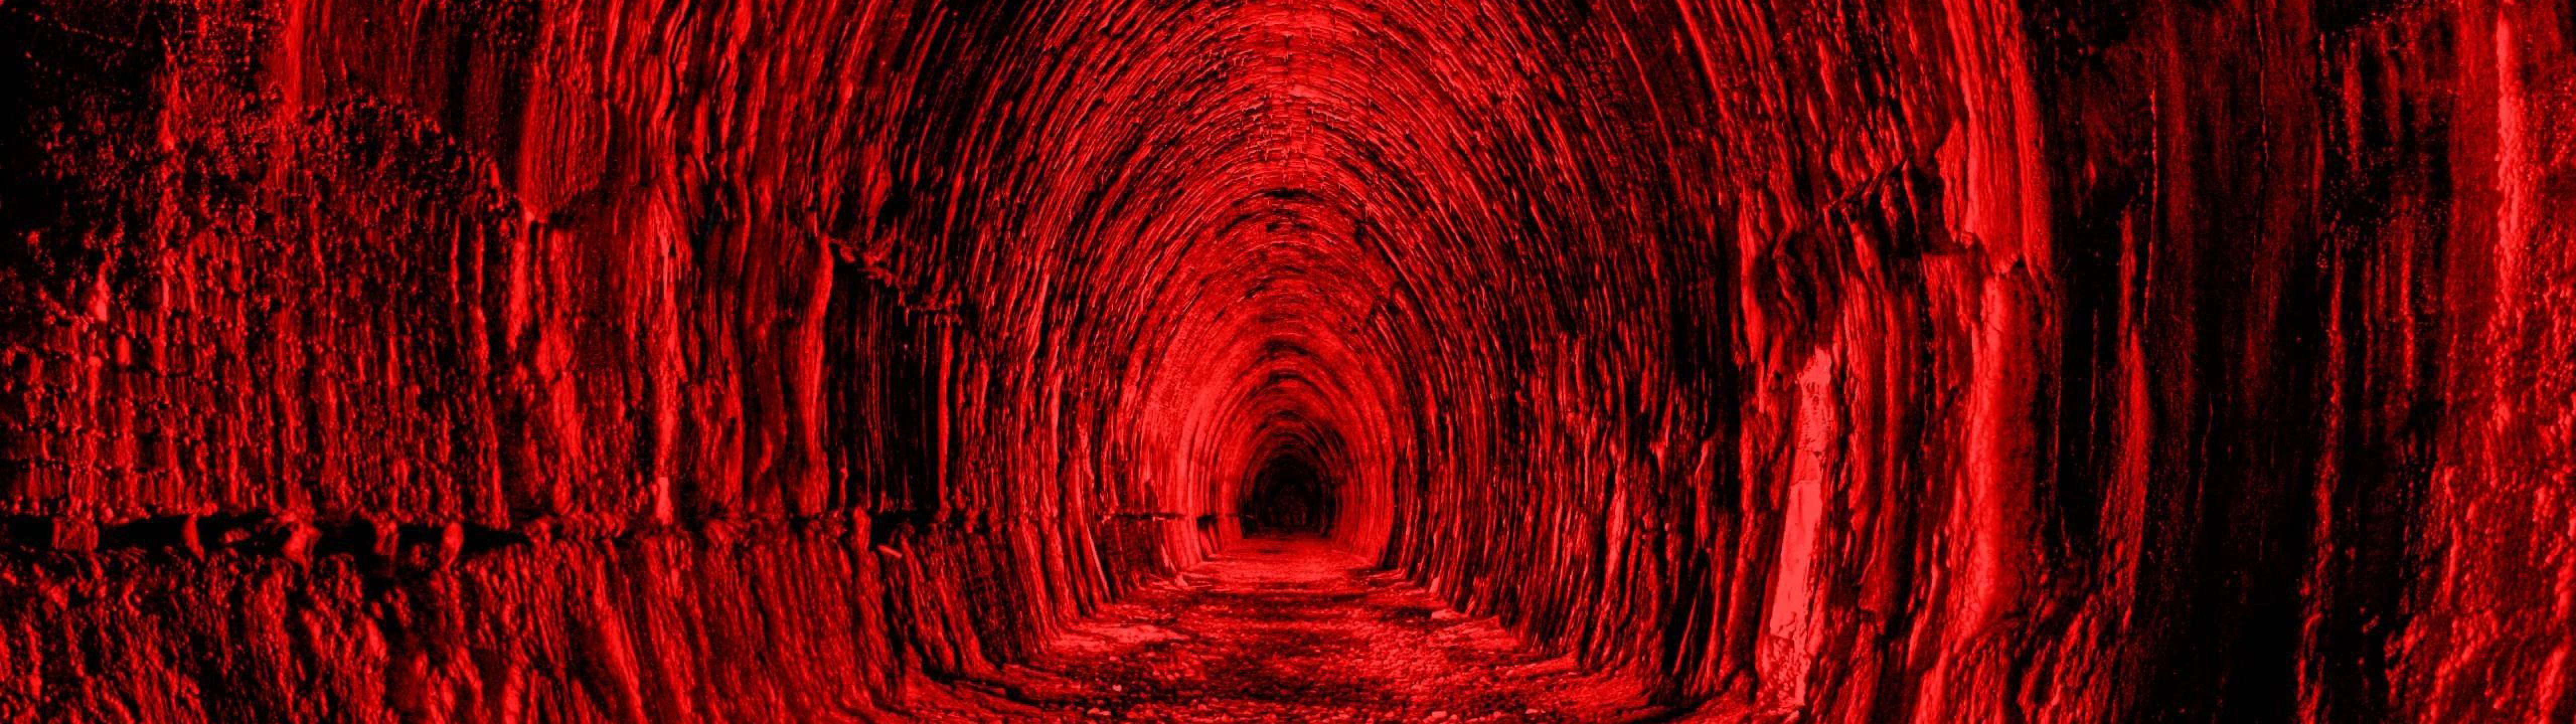 Resolution Red Aesthetic Tunnel 5120x1440 Resolution Wallpaper